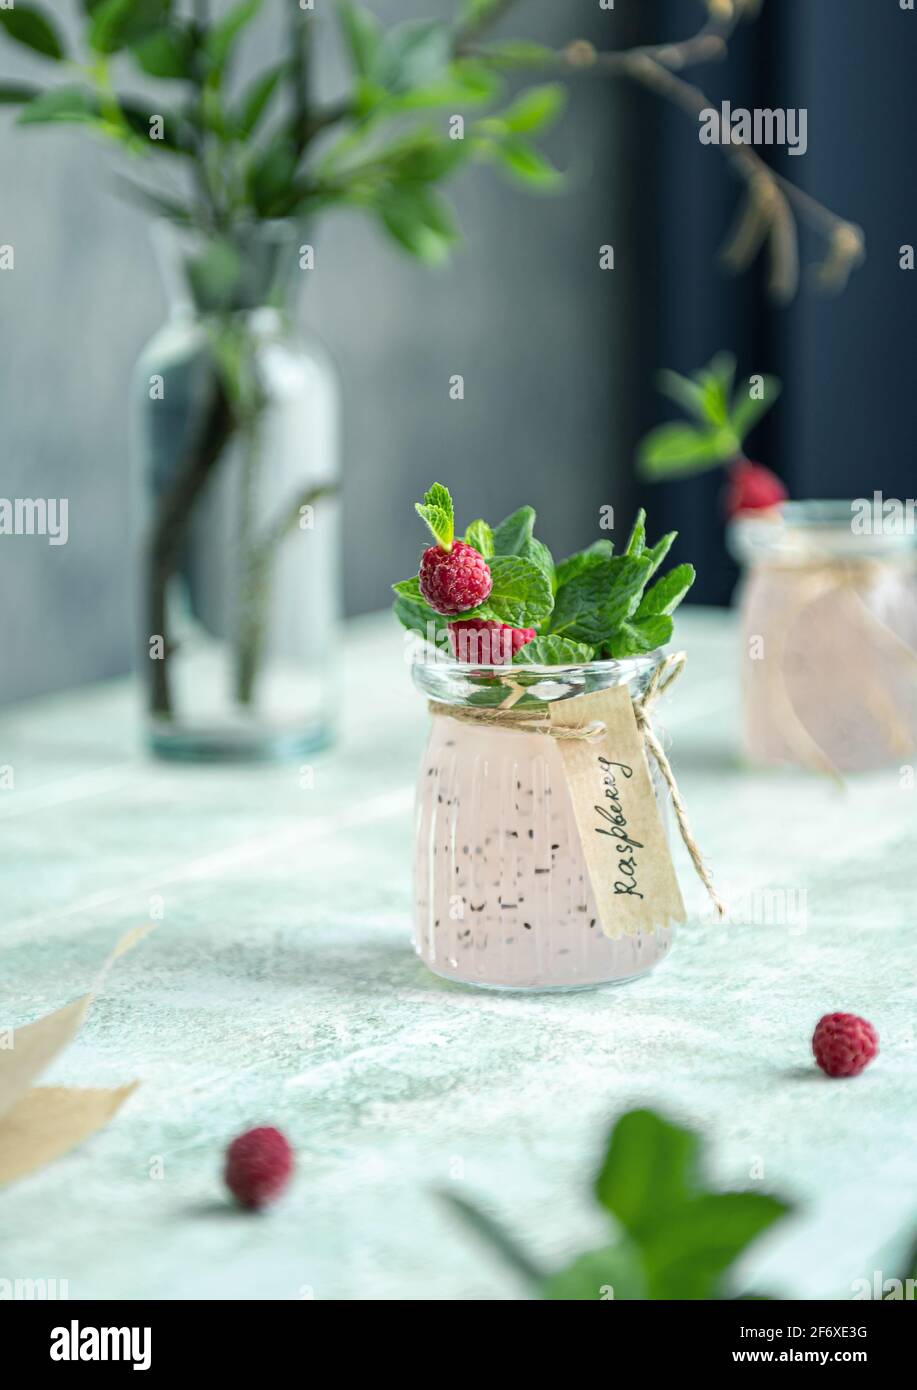 Close up of homemade detox drink made of raspberry, basil seeds and mint leaves. Decorated with hand written label. Refreshing drink in natural light. Stock Photo